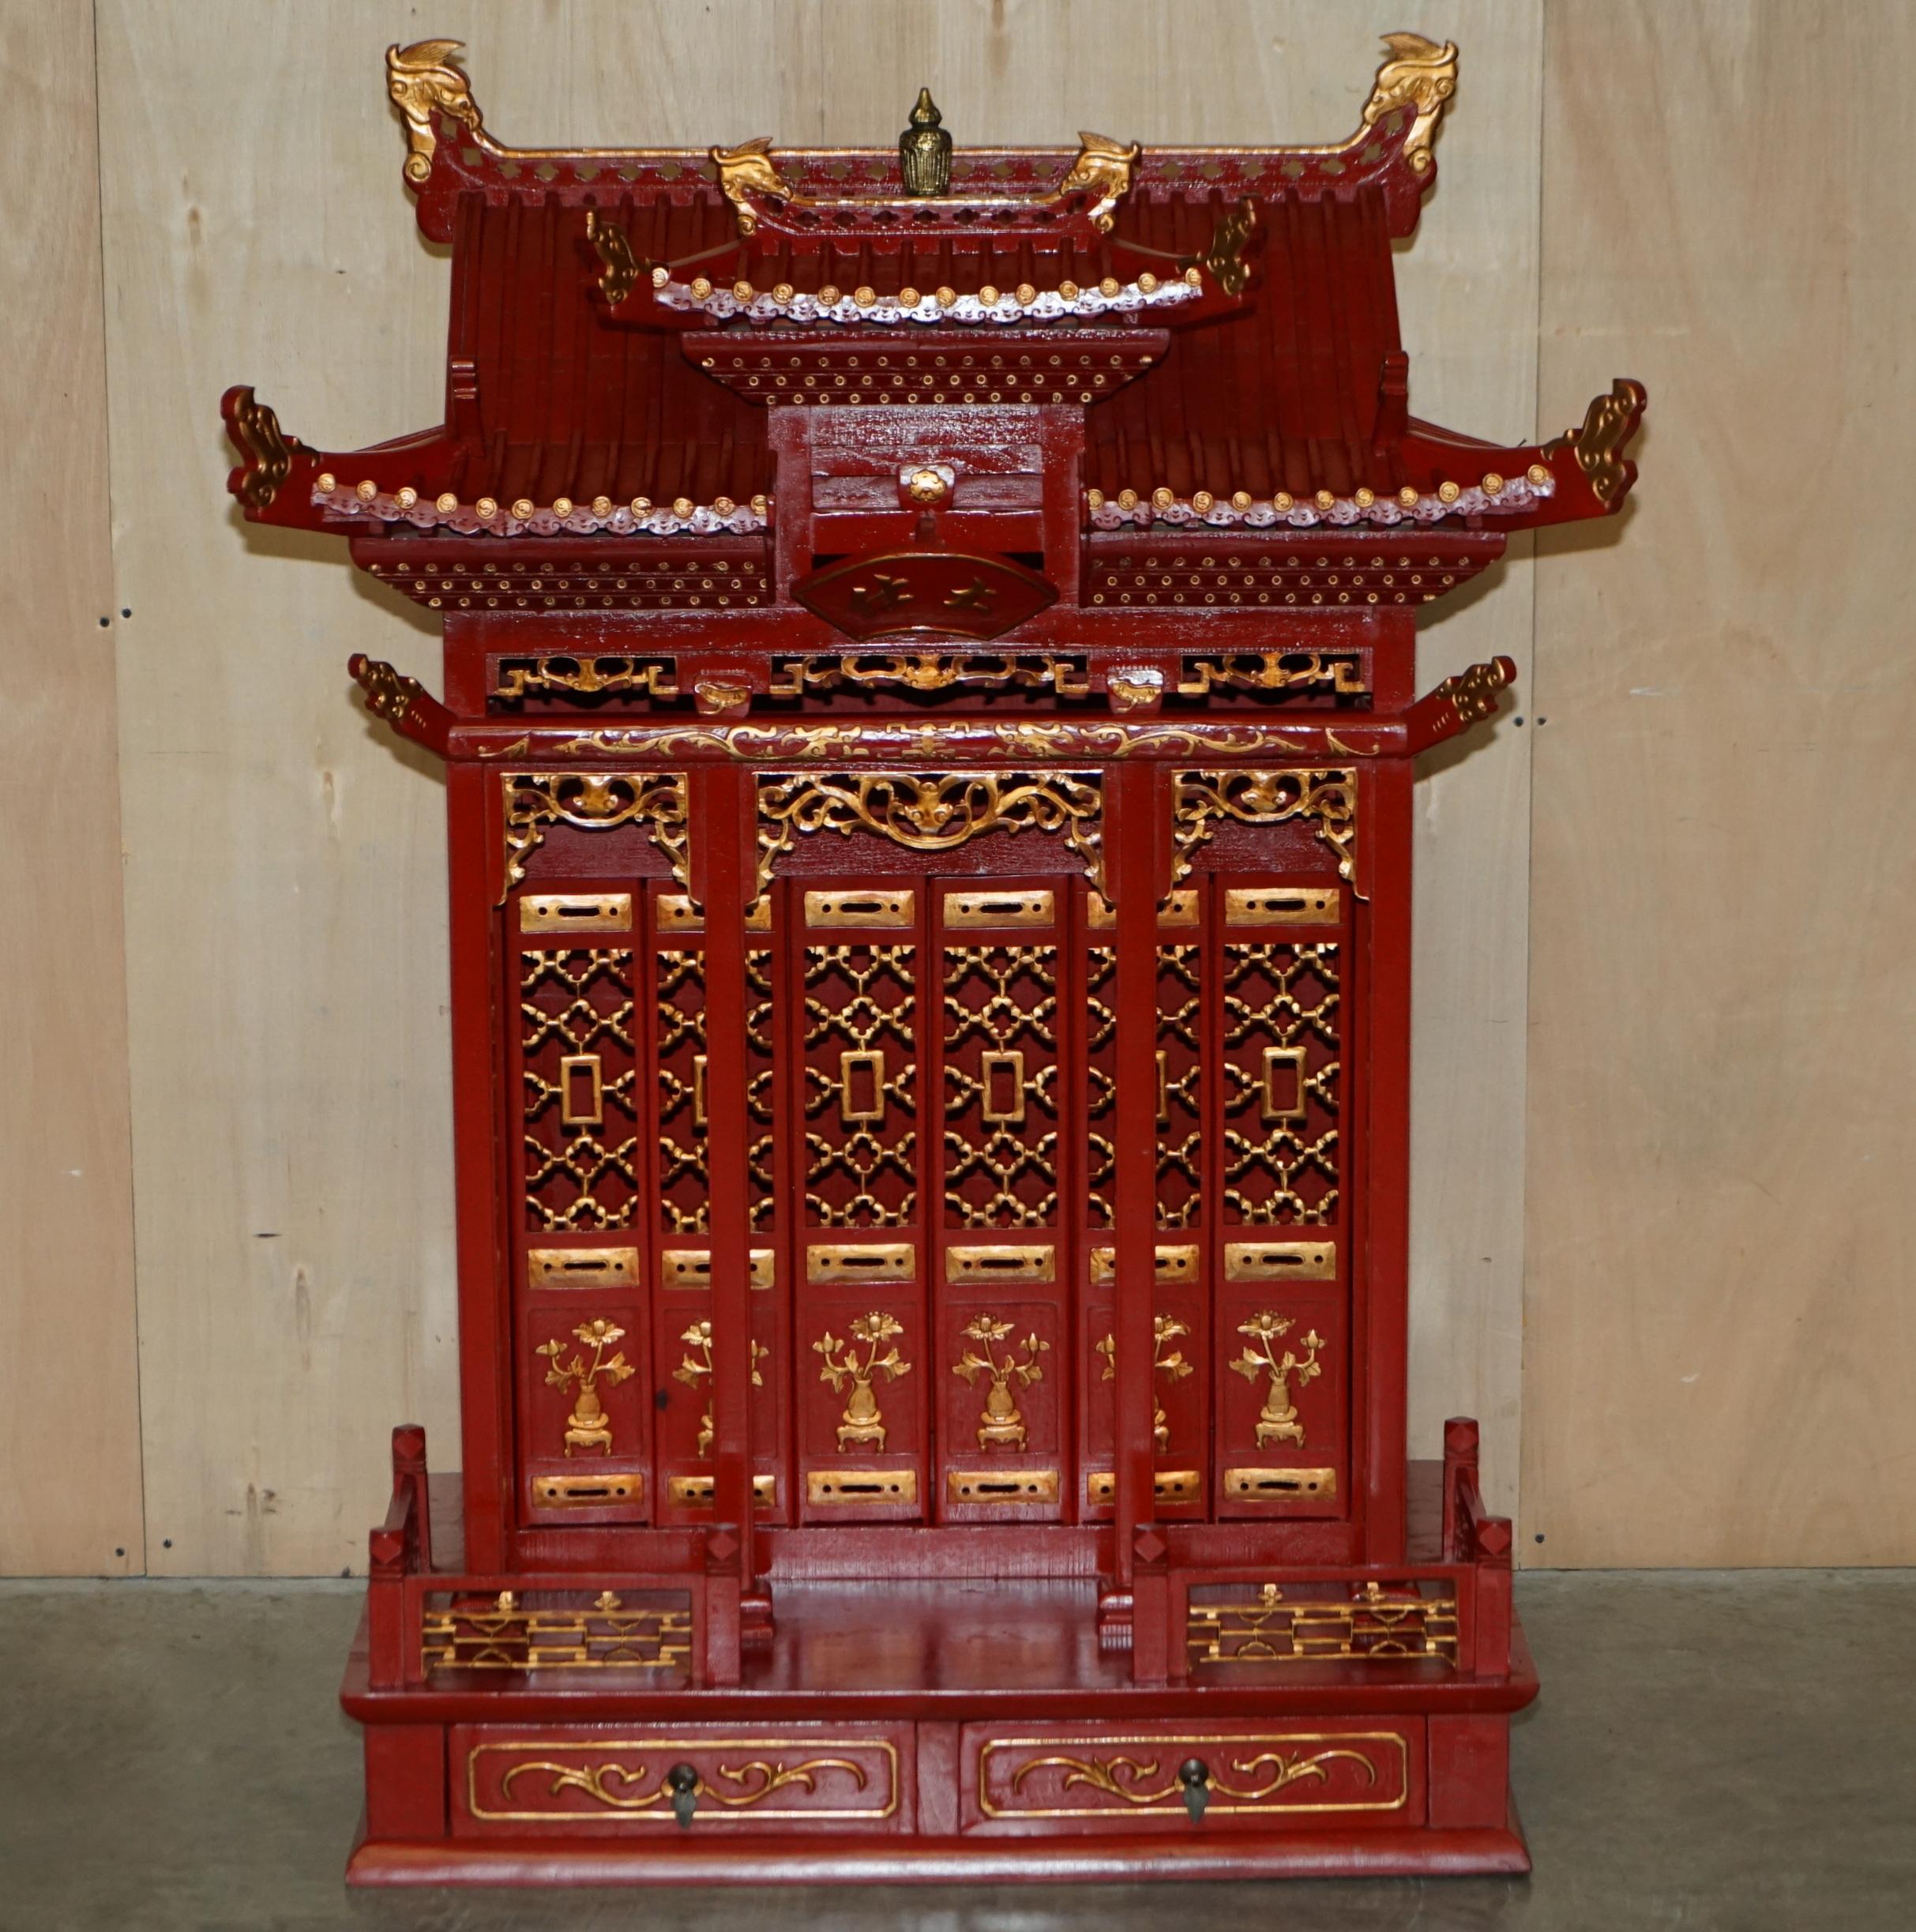 We are delighted to offer for sale this lovely large vintage circa 1930's hand painted and lacquered Chinese Pagoda top cabinet 

A very good looking and well made piece, I have never seen another like this. It has a nicely patinated elm lacquered